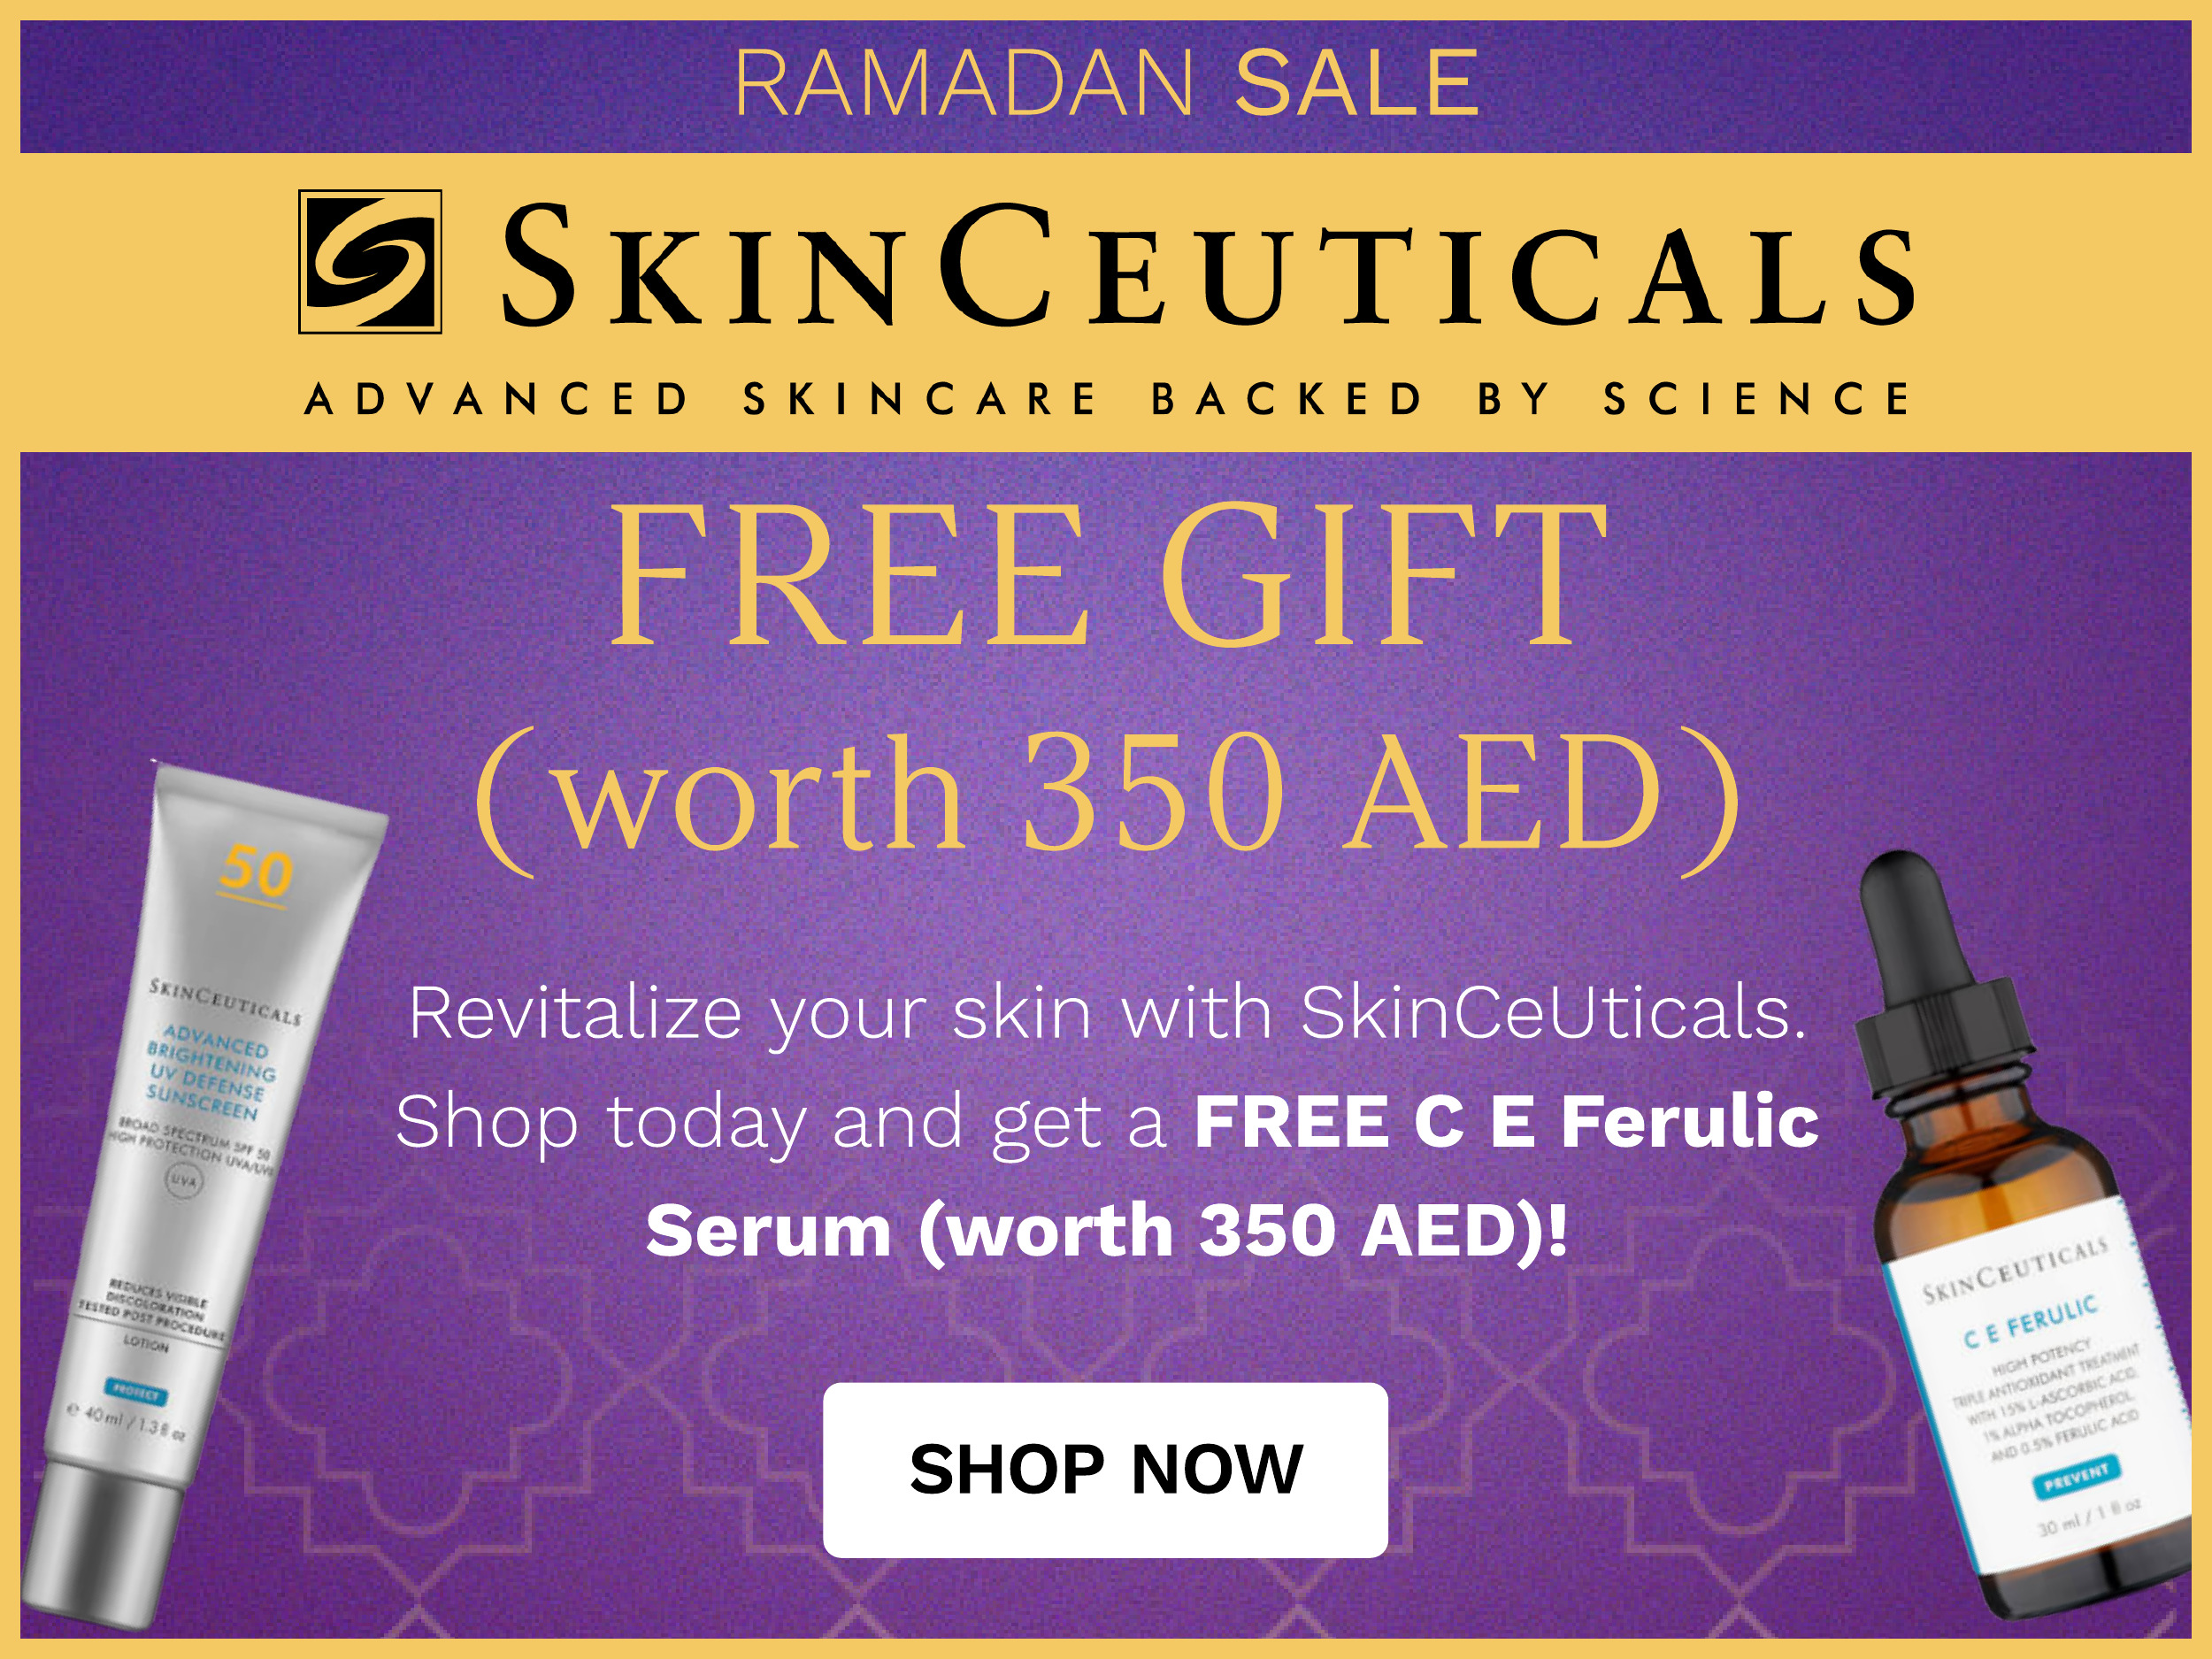  SKINCEUTICALS ADVANCED SKINCARE BACKED BY SCIENCE FREE GIFT p worth 350 AED Revitalize your skin with SkinCeUticals. Shop today and get a FREE C E Ferulic Serum worth 350 AED! SHOP NOW 